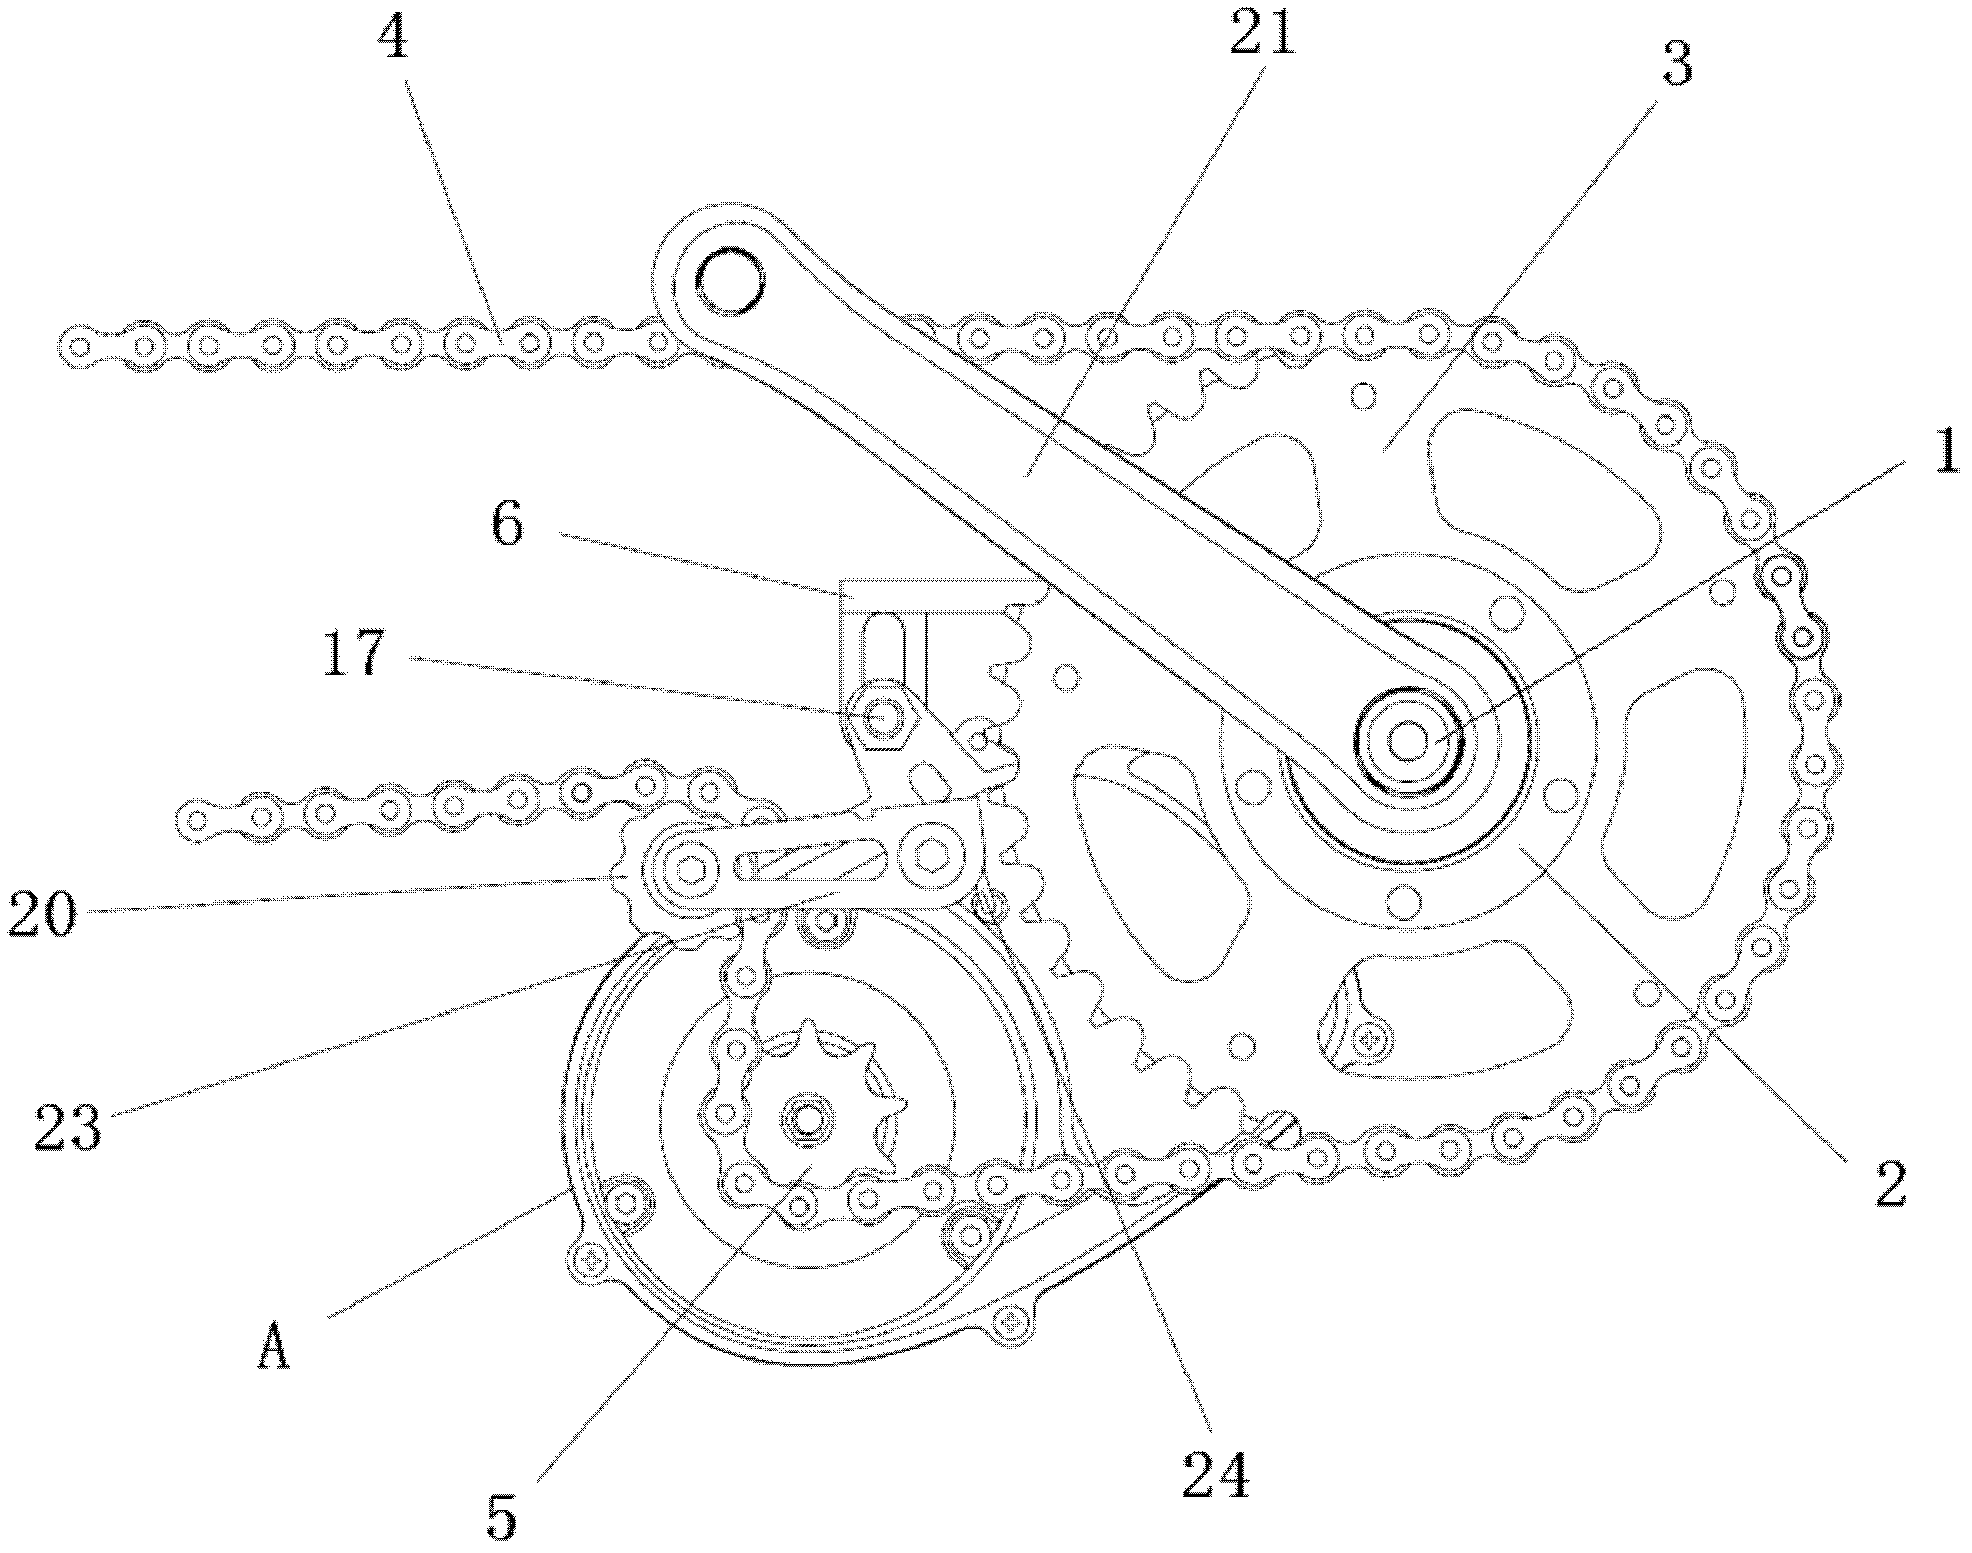 Electric power assisting device for bicycles